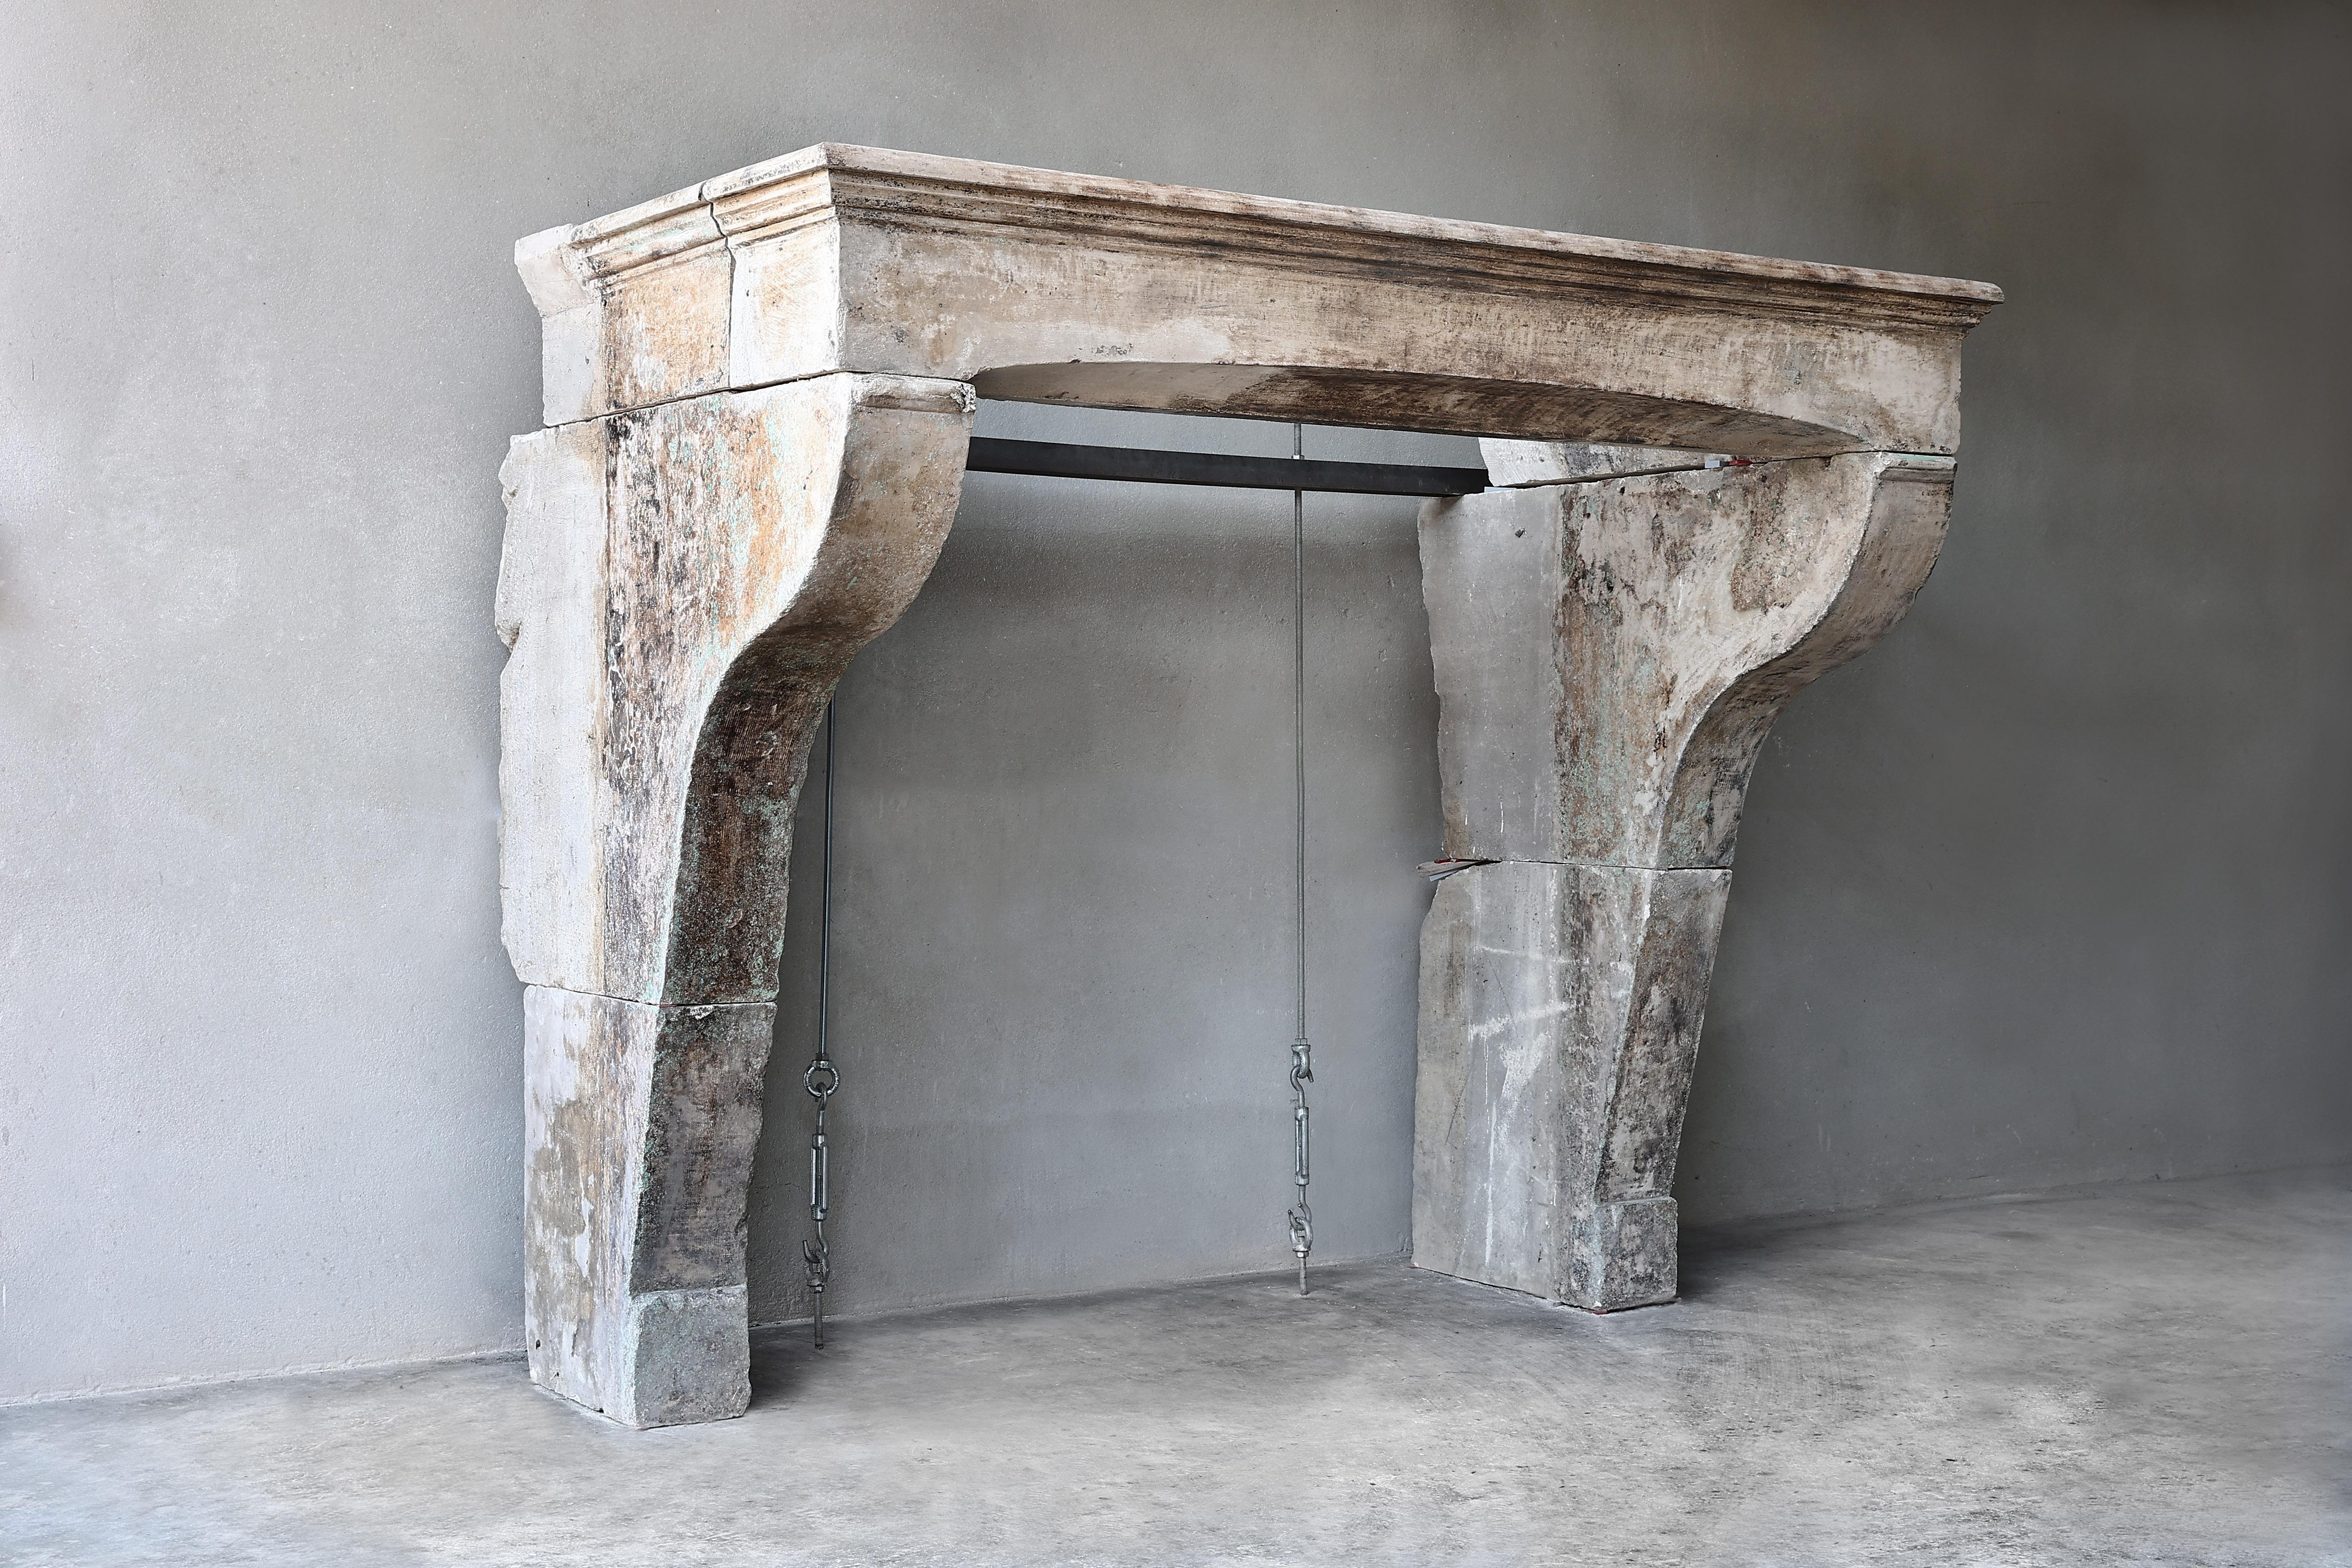 Antique Mantle Surround in French Limestone from the 19th Century in Campagnarde Style
Beautiful rustic French limestone mantle from the 19th century. An antique fireplace with beautiful lines in the front part and slightly curved legs! The